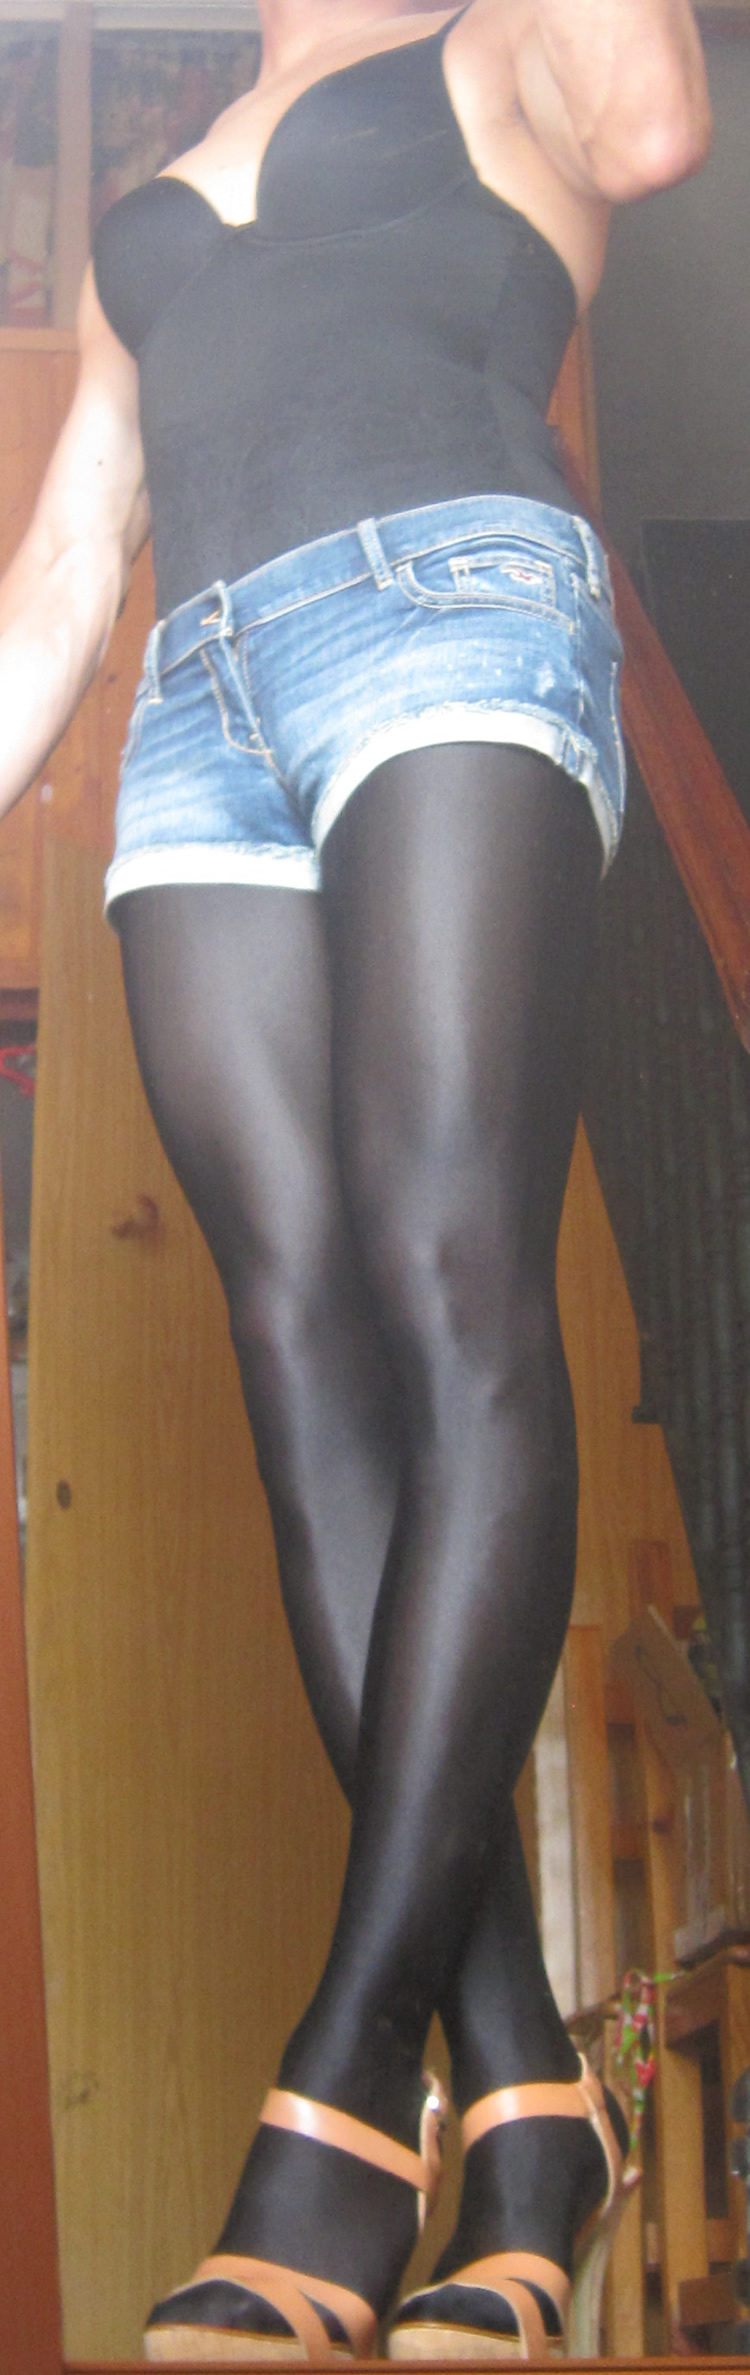 DaisyDukes with Fogal Rapallo tights